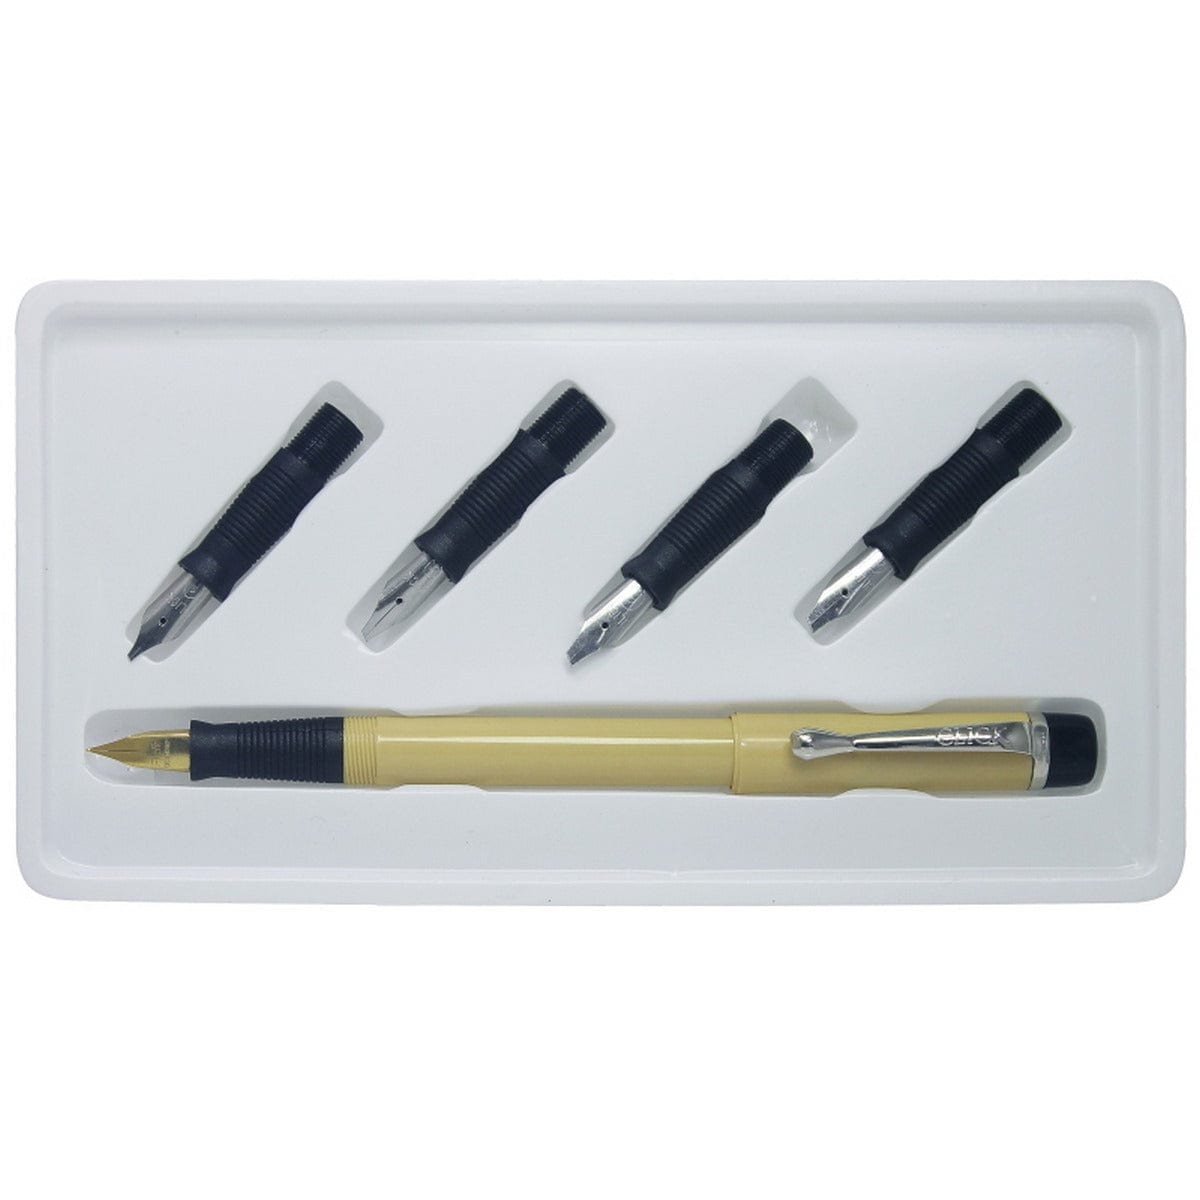 jags-mumbai Calligraphy Calligraphy Click Set for Devanagari Script - Perfect for Beginners and Experts